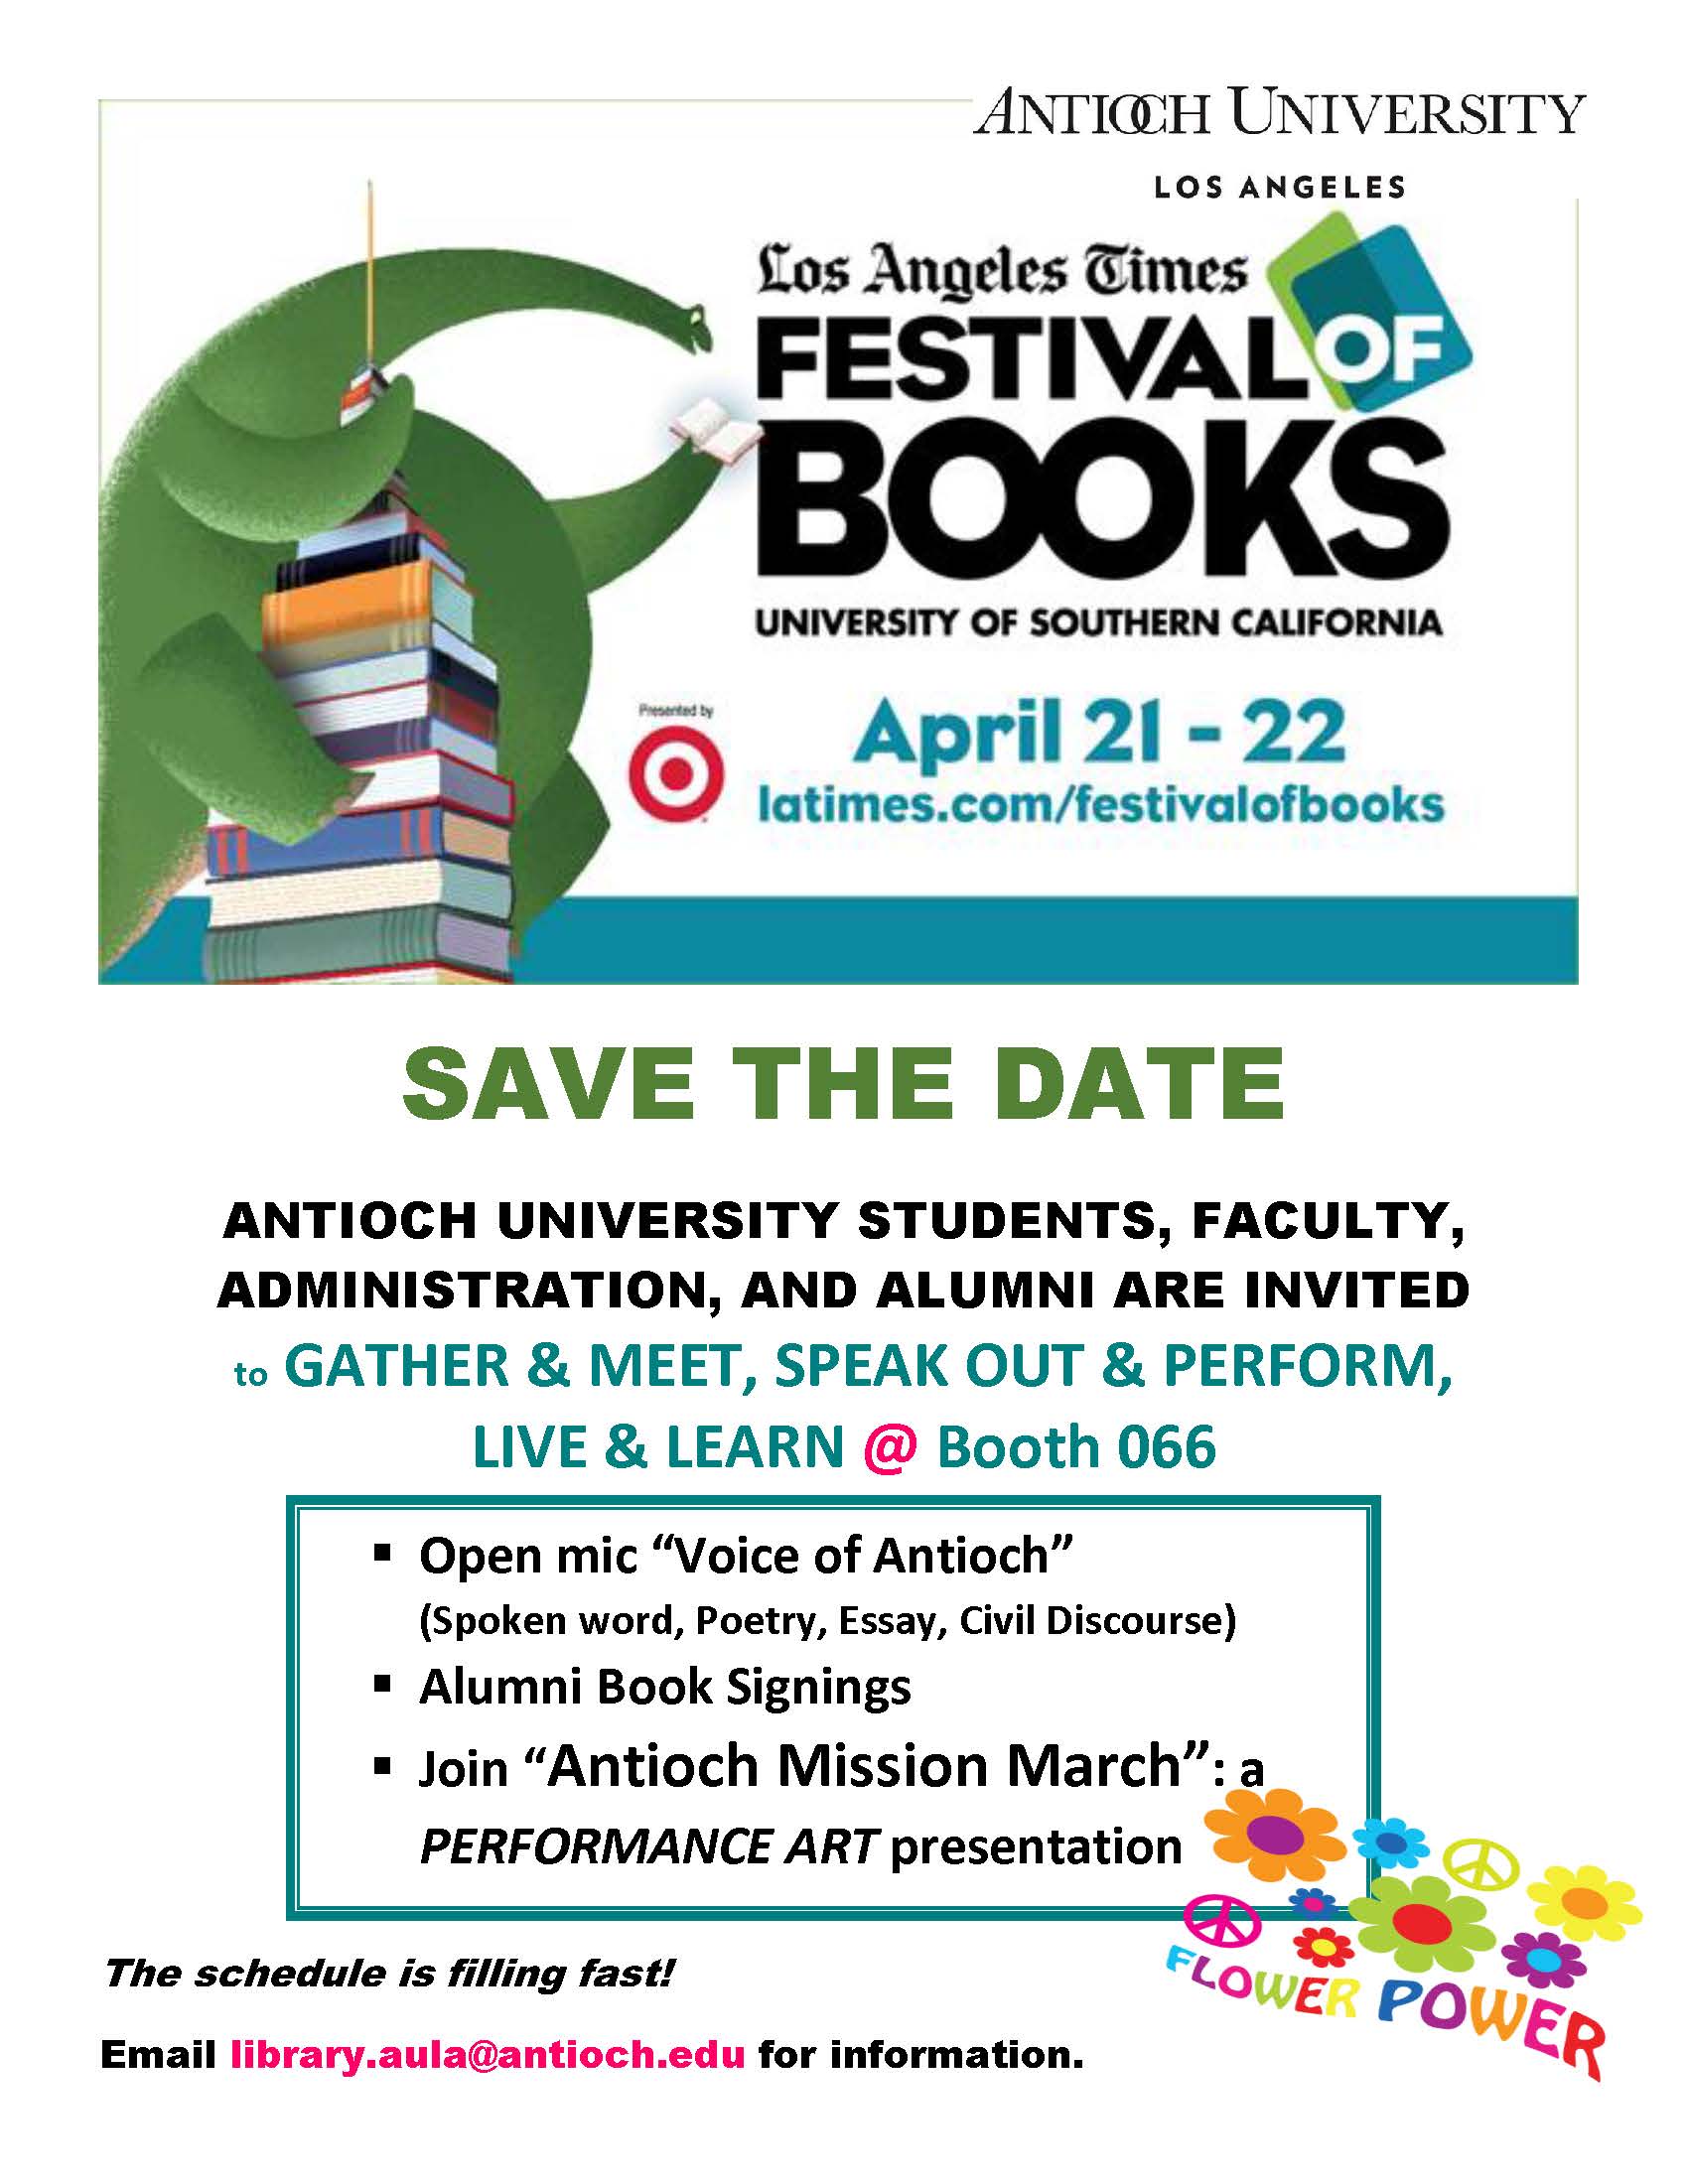 LA Times Festival of Books flier with dinosaur climbing stack of books